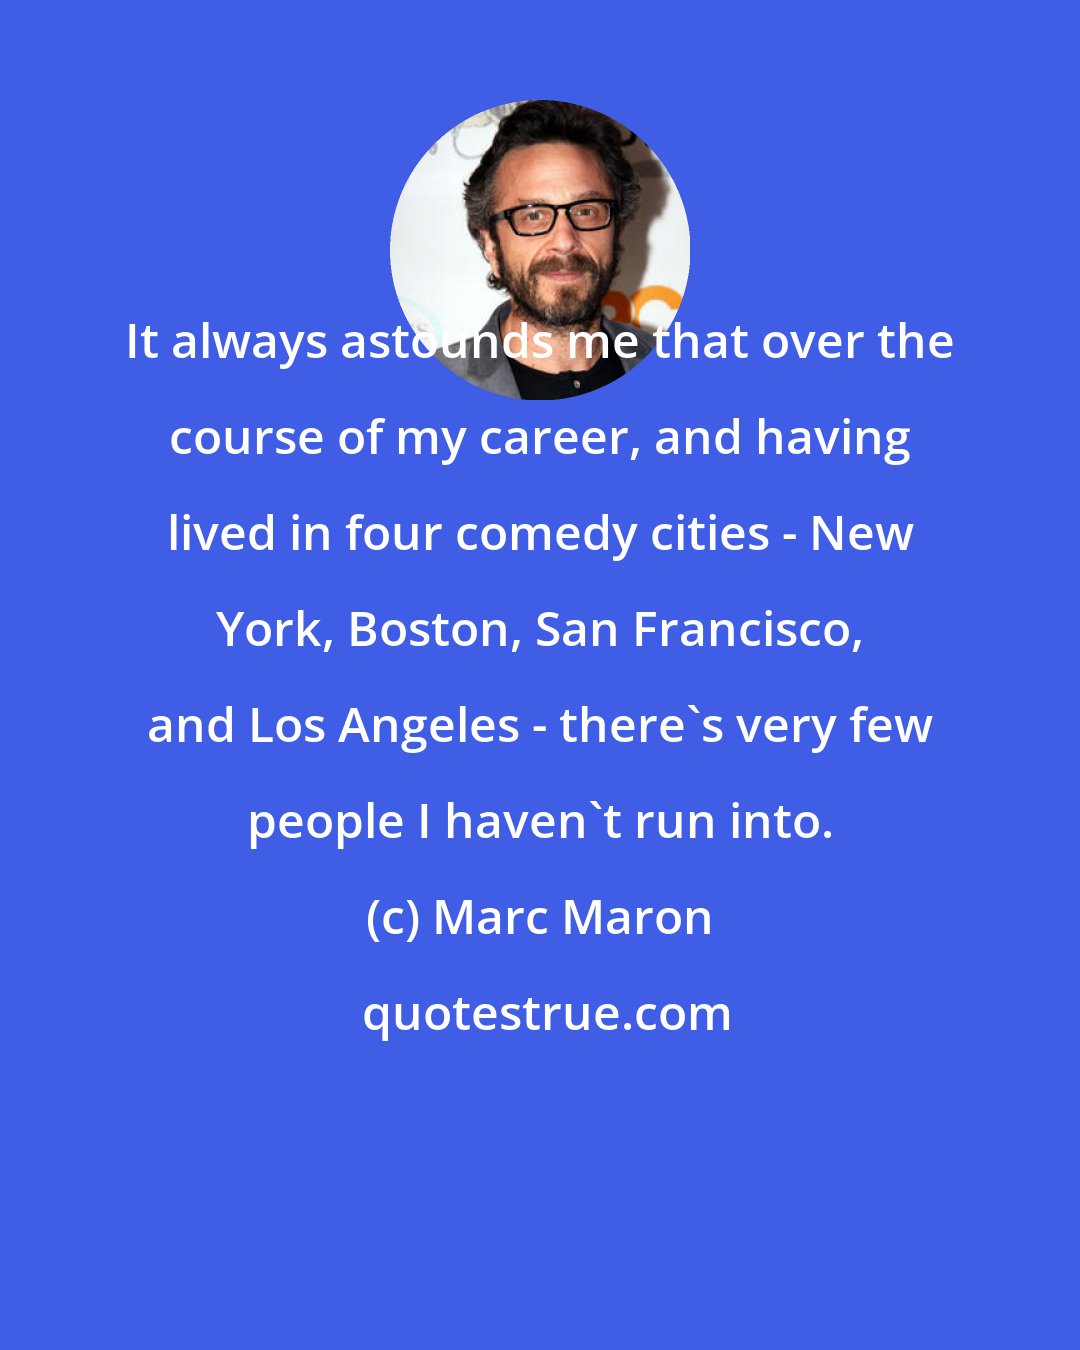 Marc Maron: It always astounds me that over the course of my career, and having lived in four comedy cities - New York, Boston, San Francisco, and Los Angeles - there's very few people I haven't run into.